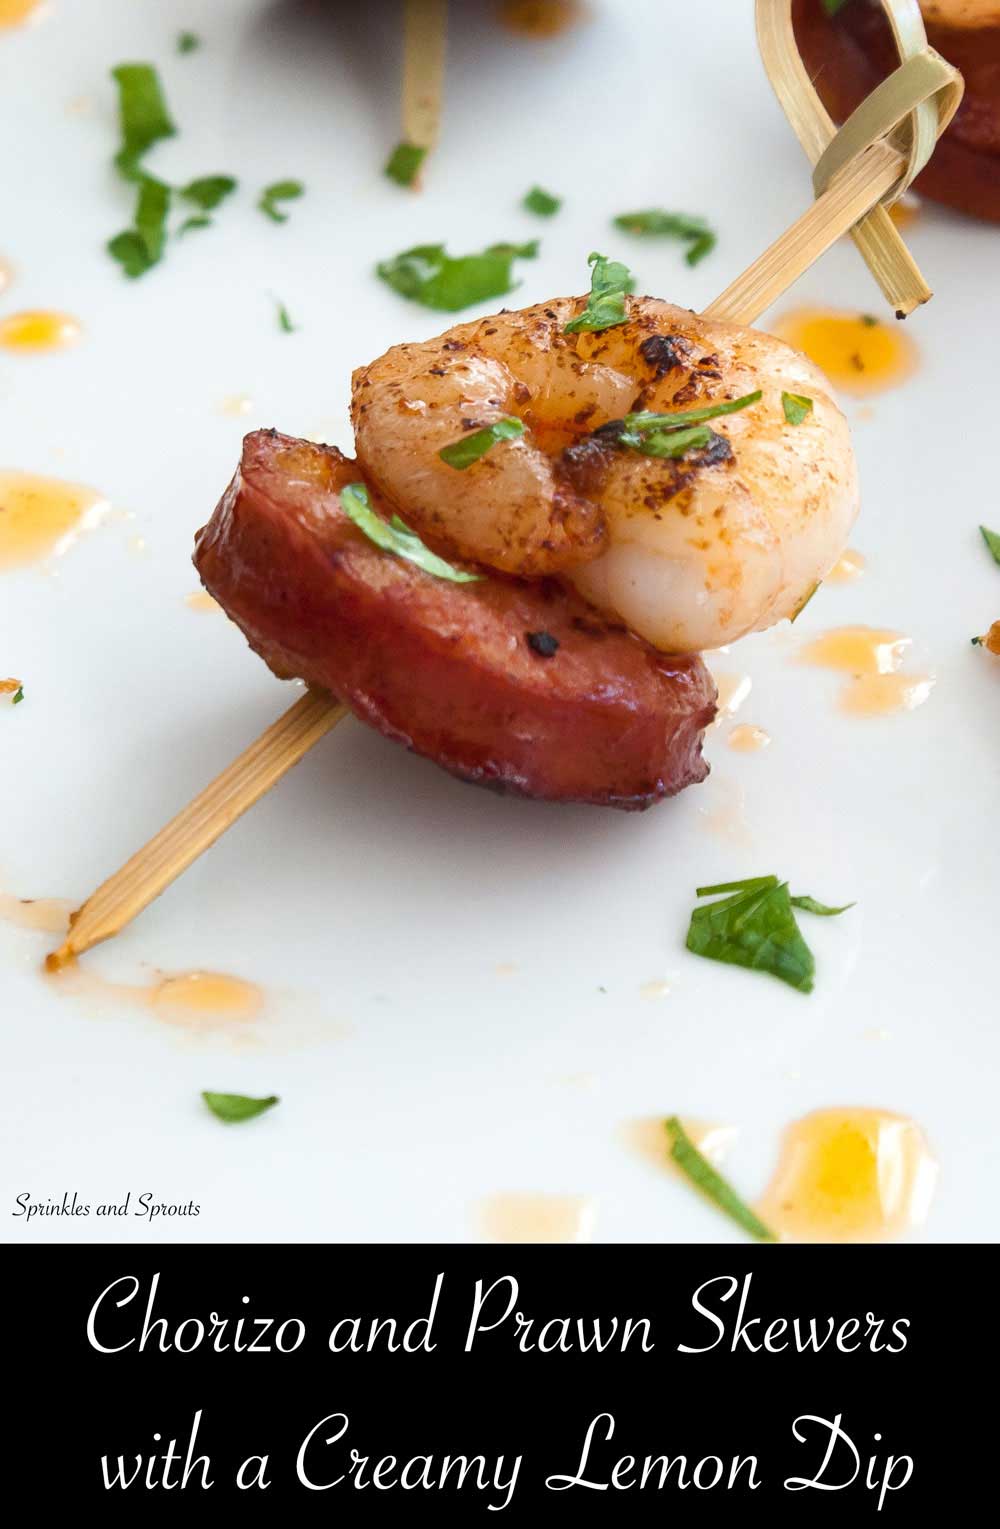 Chorizo and Prawn Skewers with a Creamy Lemon Dip. A delicious and simple appetiser that will be demolished in seconds.